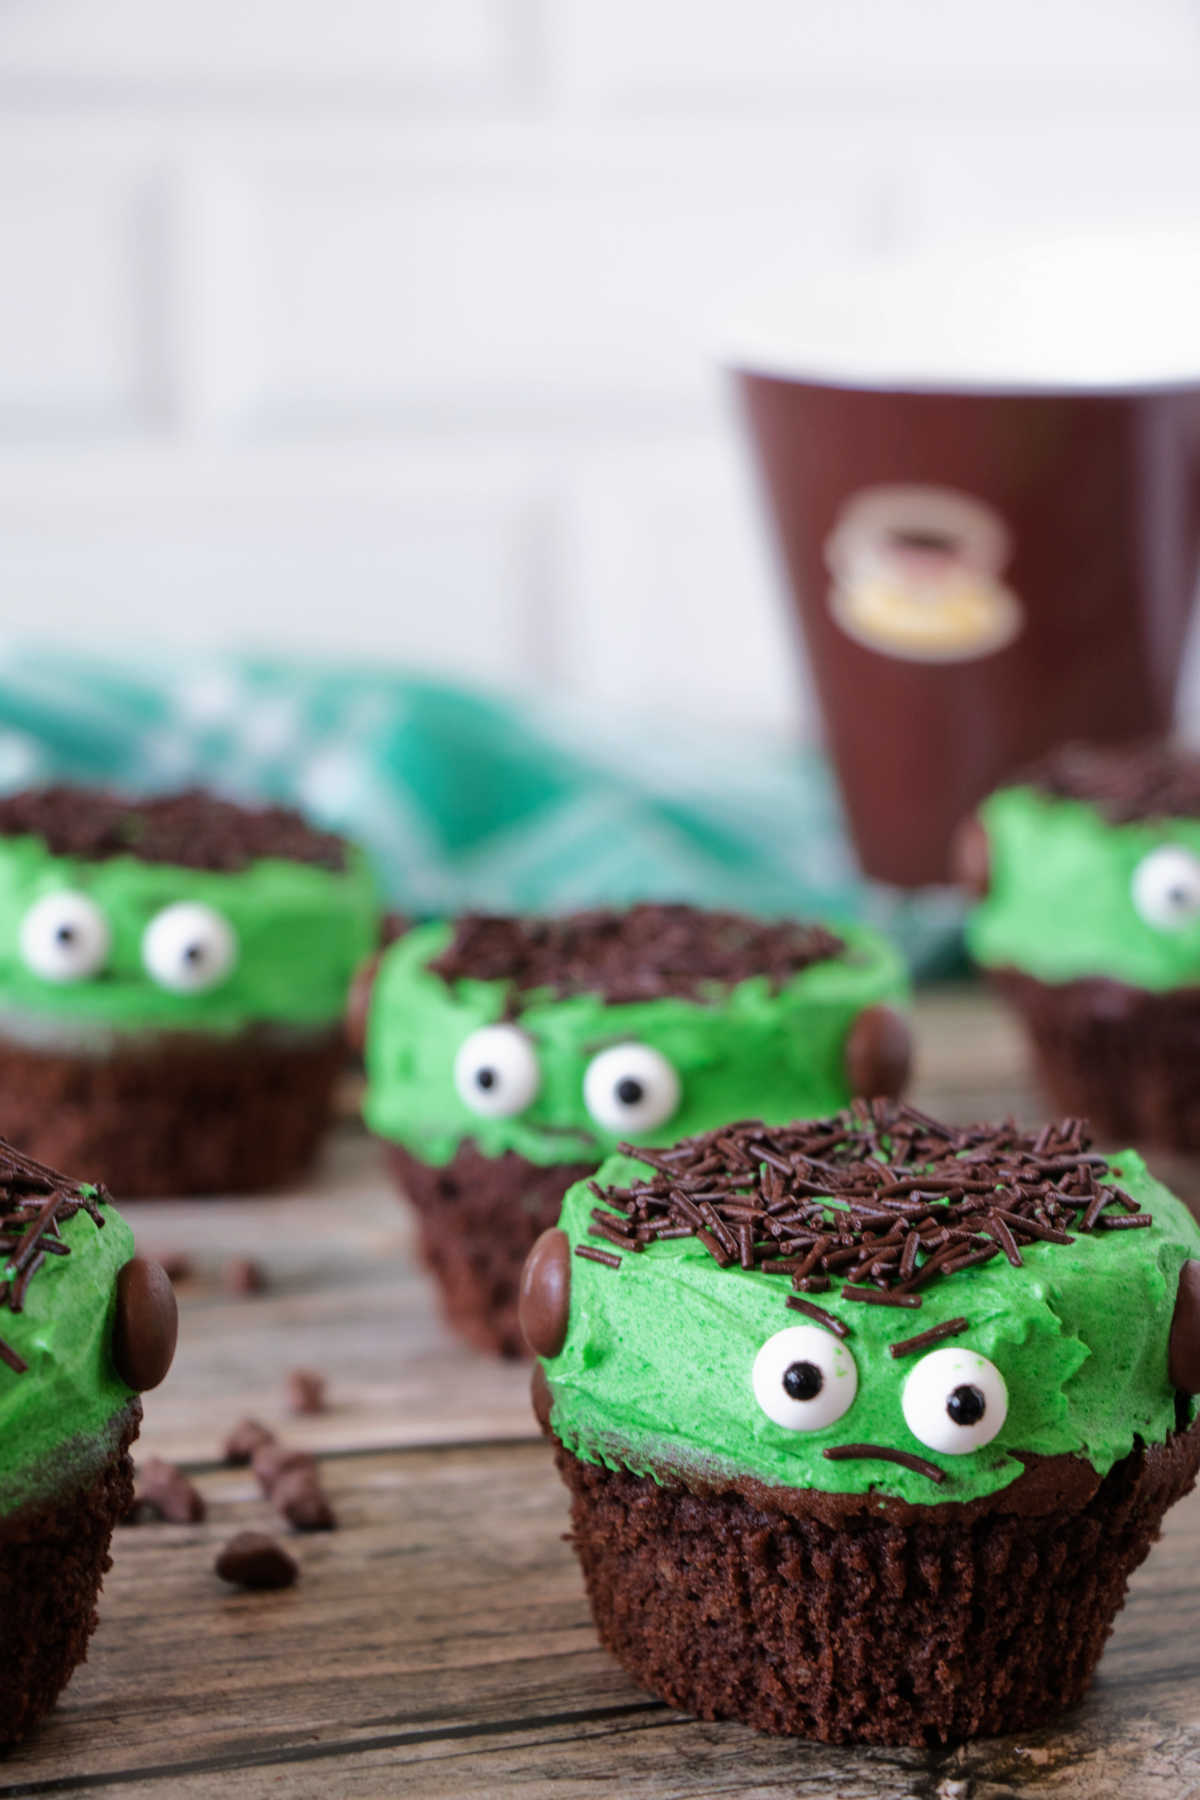 Lots of Frankenstein cupcakes in front of coffee cup.